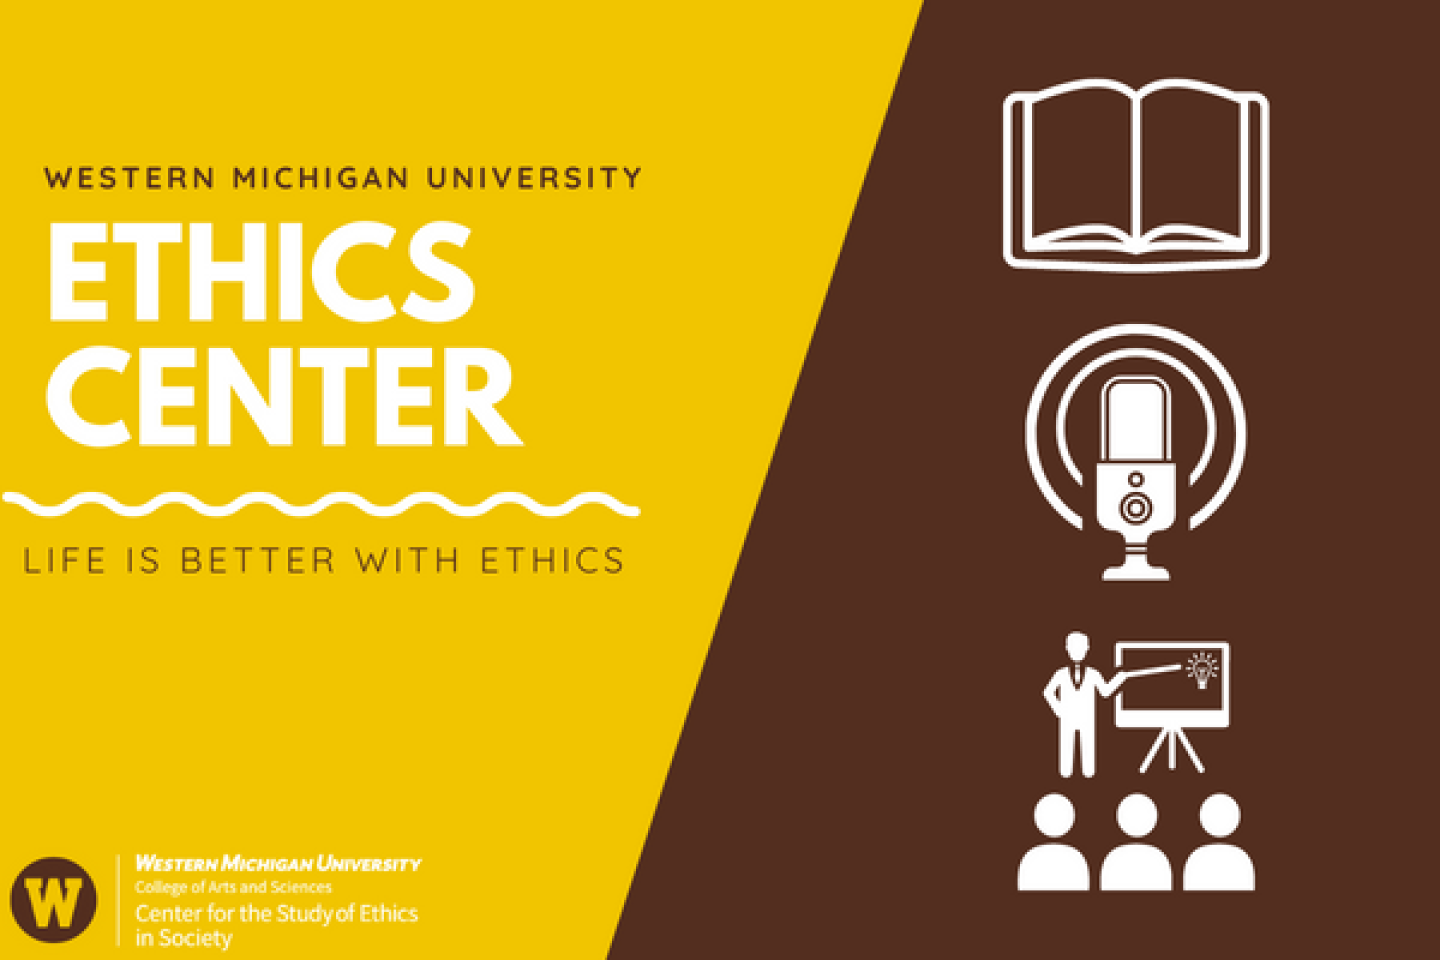 Western Michigan University Ethics Center: Life is better with ethics.